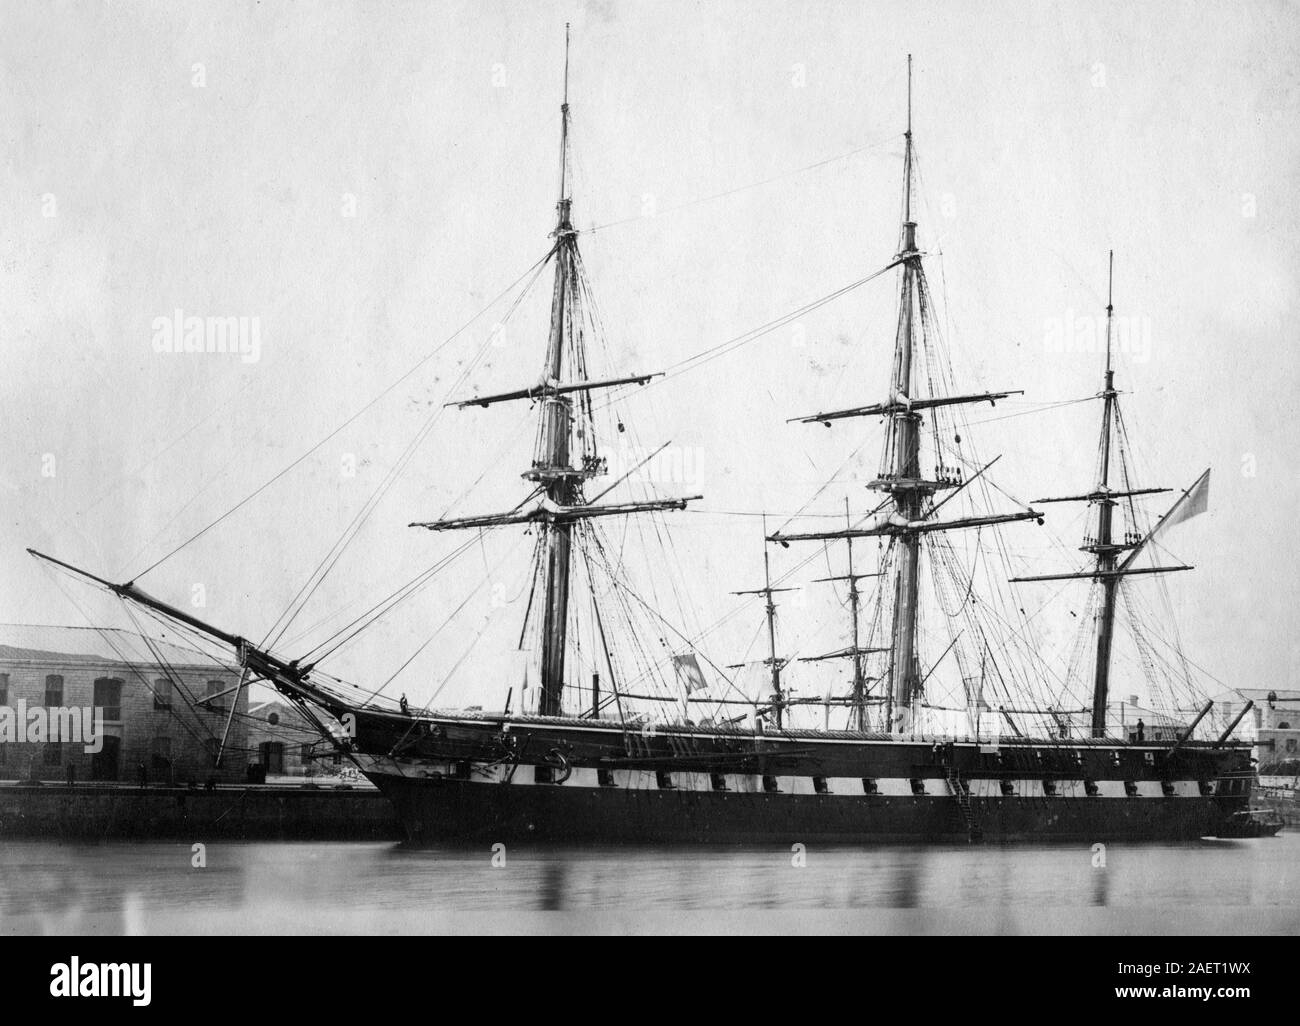 HMS Liverpool, 1861 in Bermuda or Barbados, she was a fourth-rate frigate of the Royal Navy. She was ordered on 31 March 1855, but building did not commence until 14 November 1859 and she was launched at Devonport Dockyard on 30 October 1860, in the same year that the famous iron-hulled Warrior was launched. Stock Photo